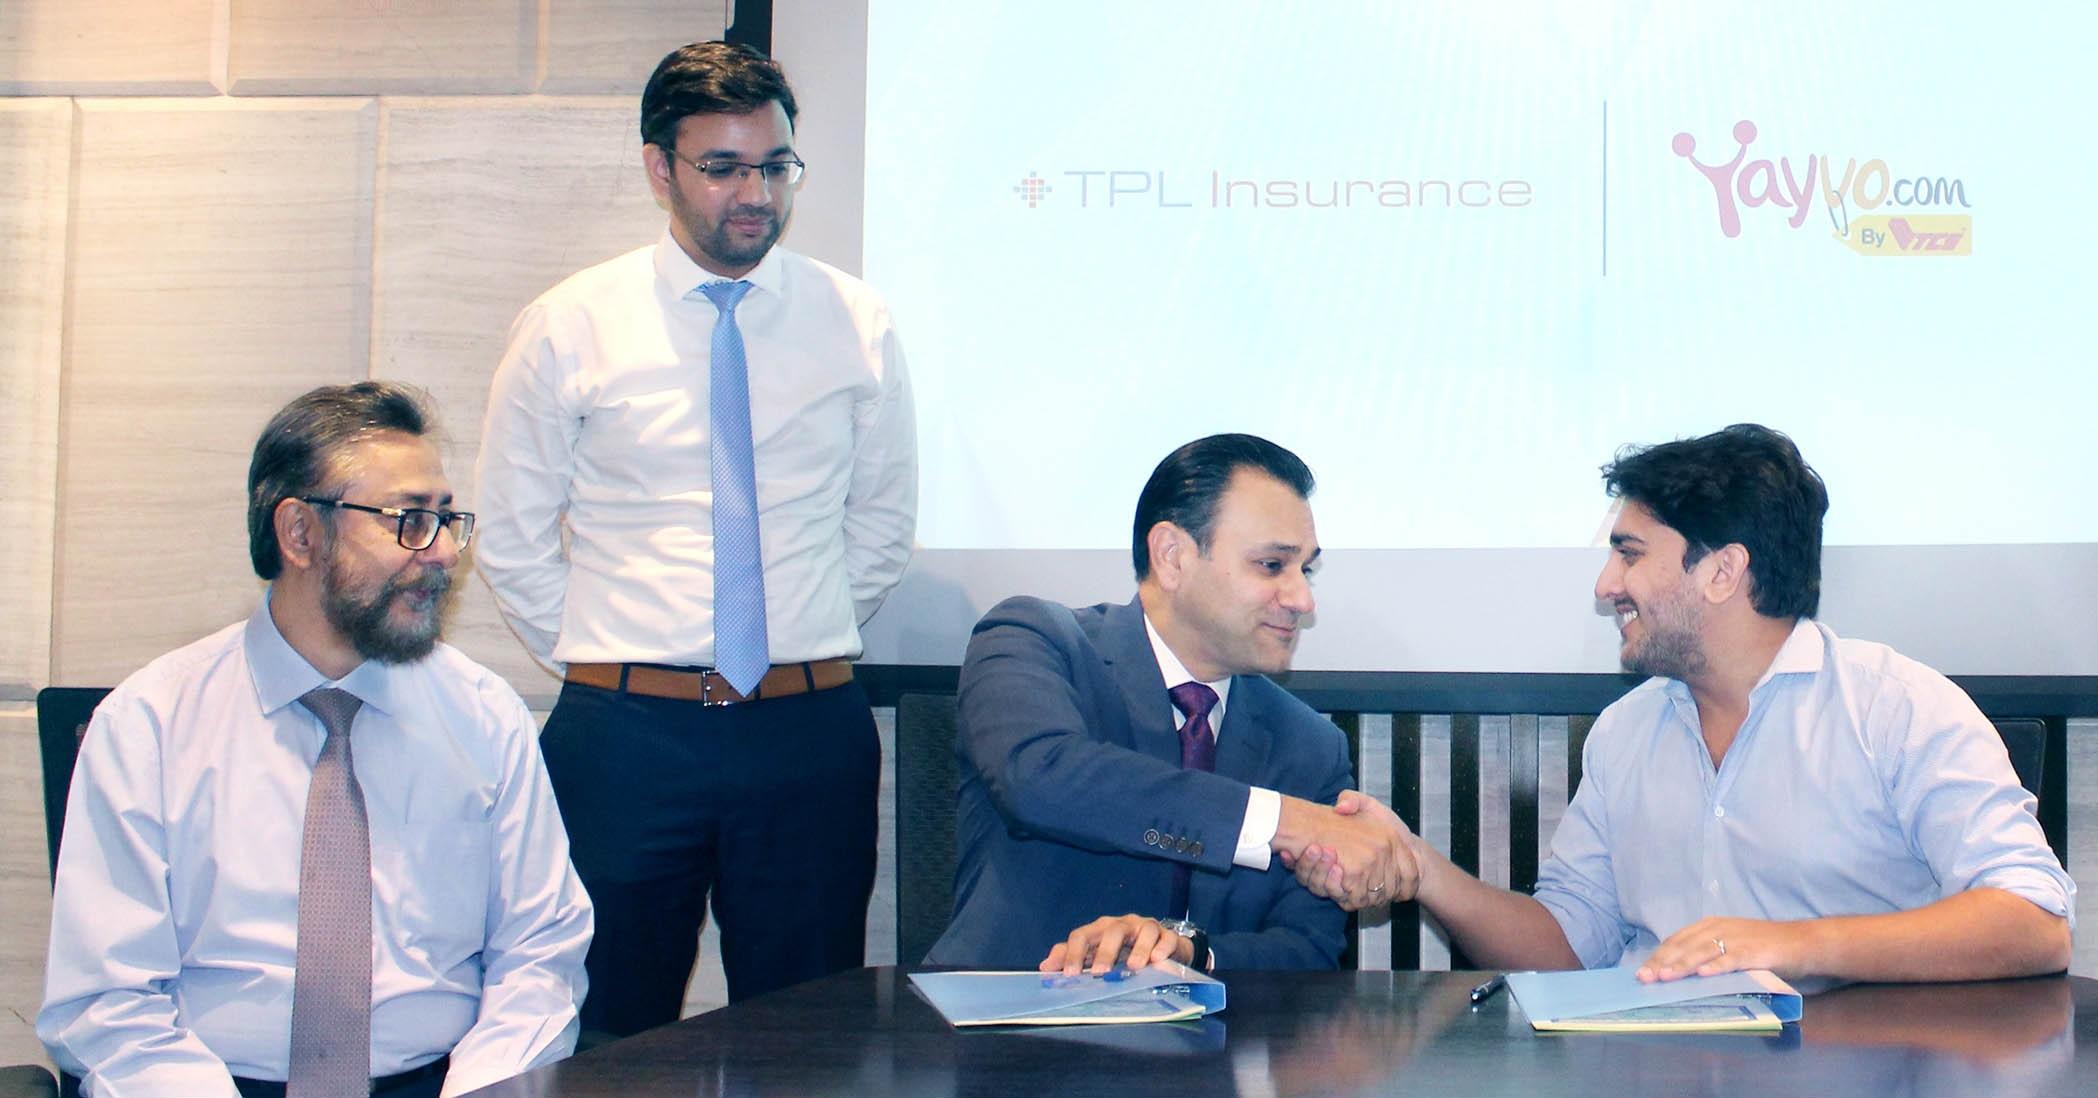 TPL Insurance & Yayvo Bring to their Customers a Secure Shopping Experience